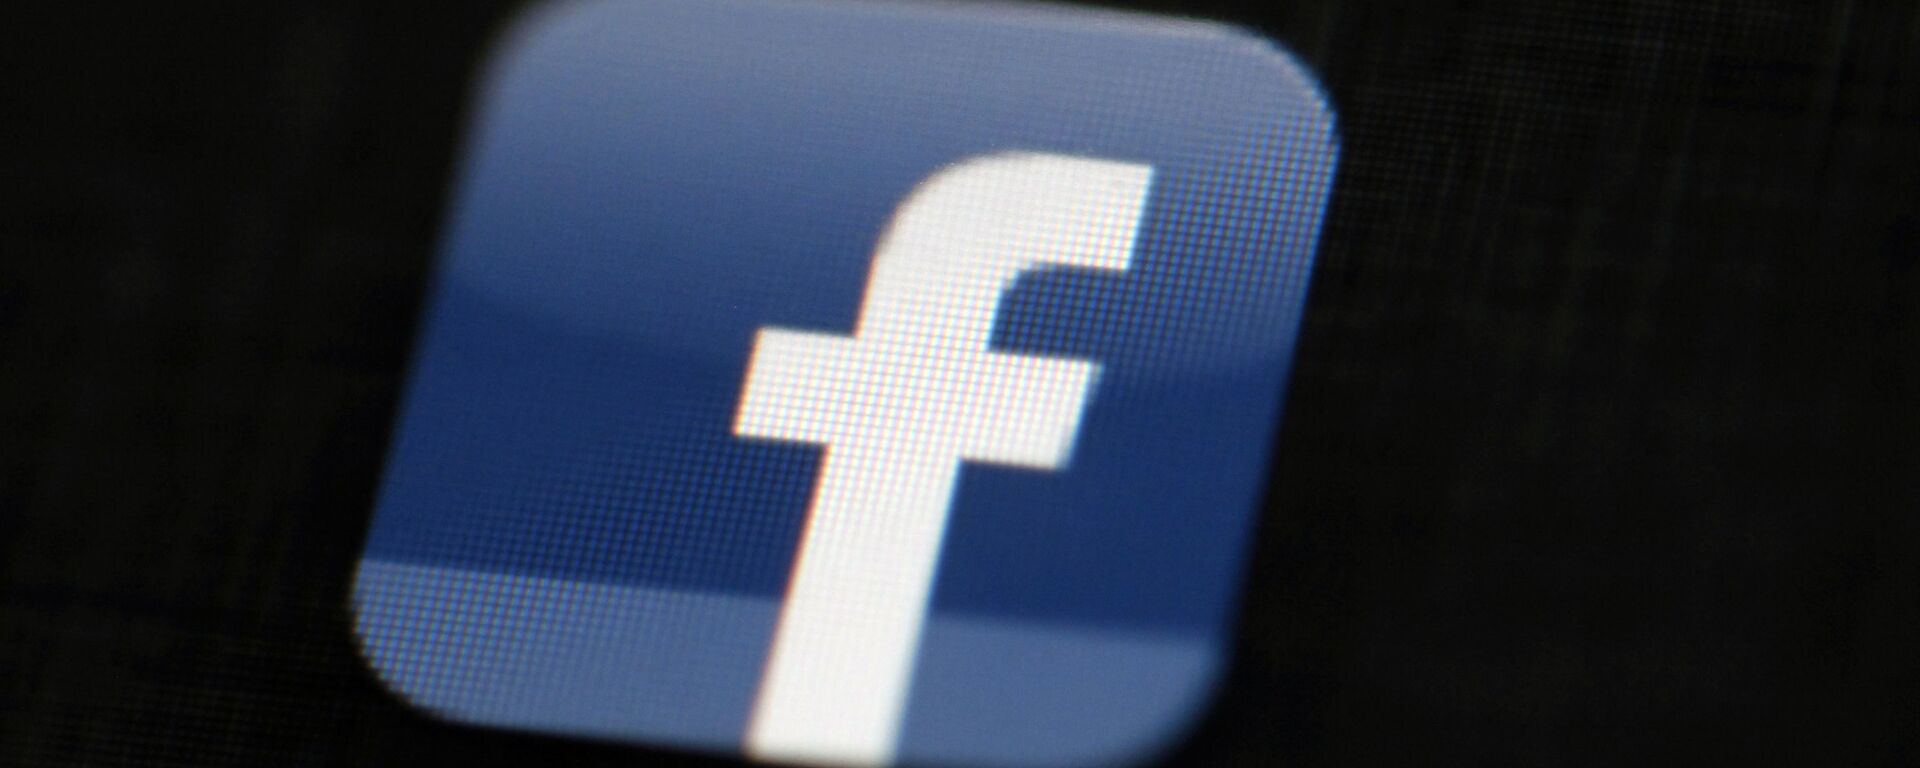 In this May 16, 2012, file photo, the Facebook logo is displayed on a mobile device in Philadelphia - Sputnik International, 1920, 12.02.2021